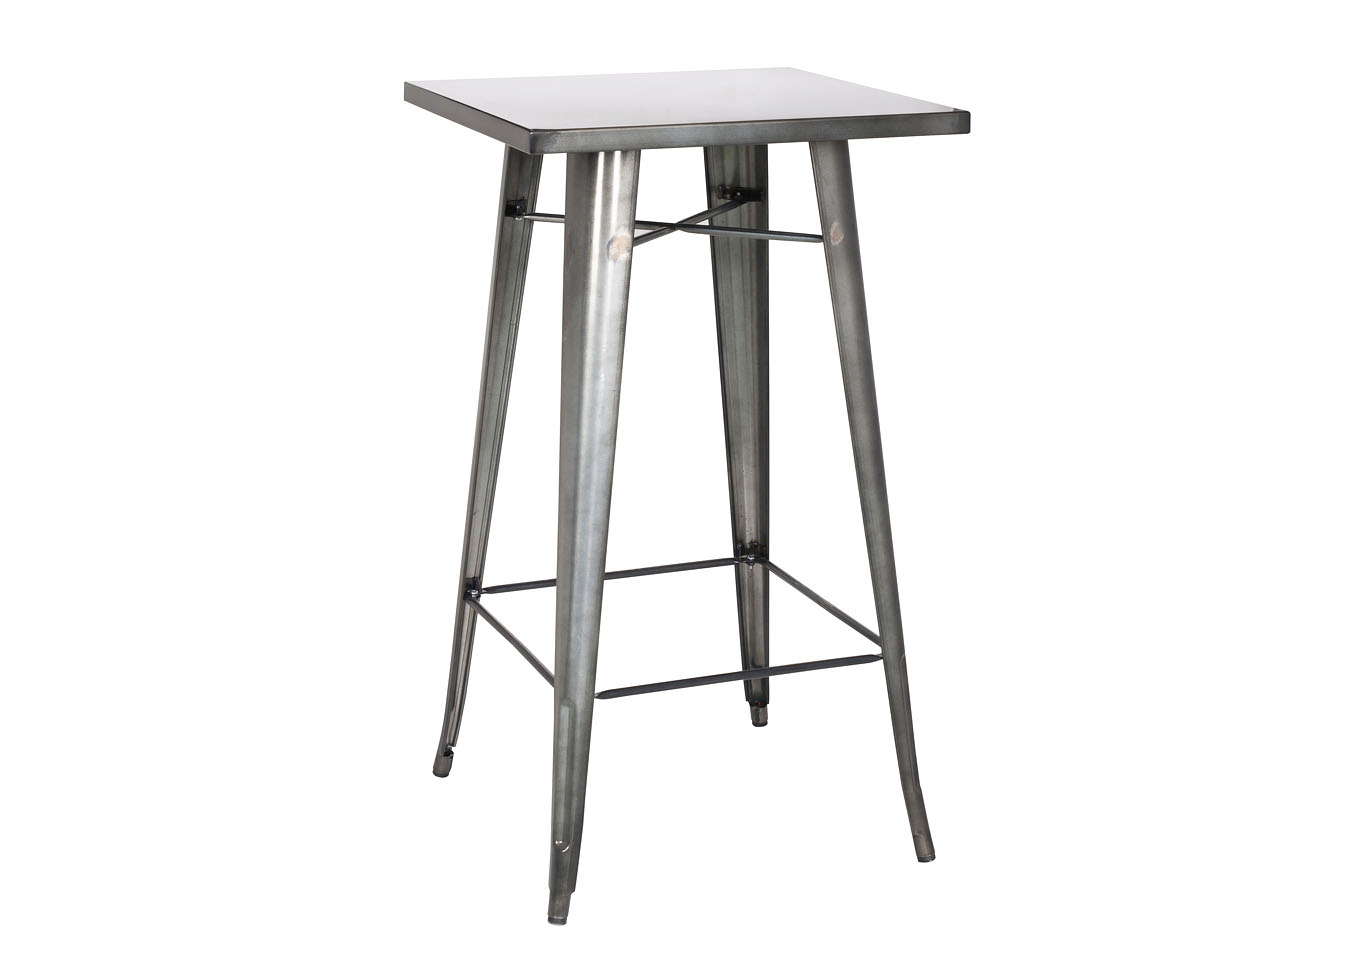 Gunmetal Galvanized Steel Square Top Pub Table,Chintaly Imports